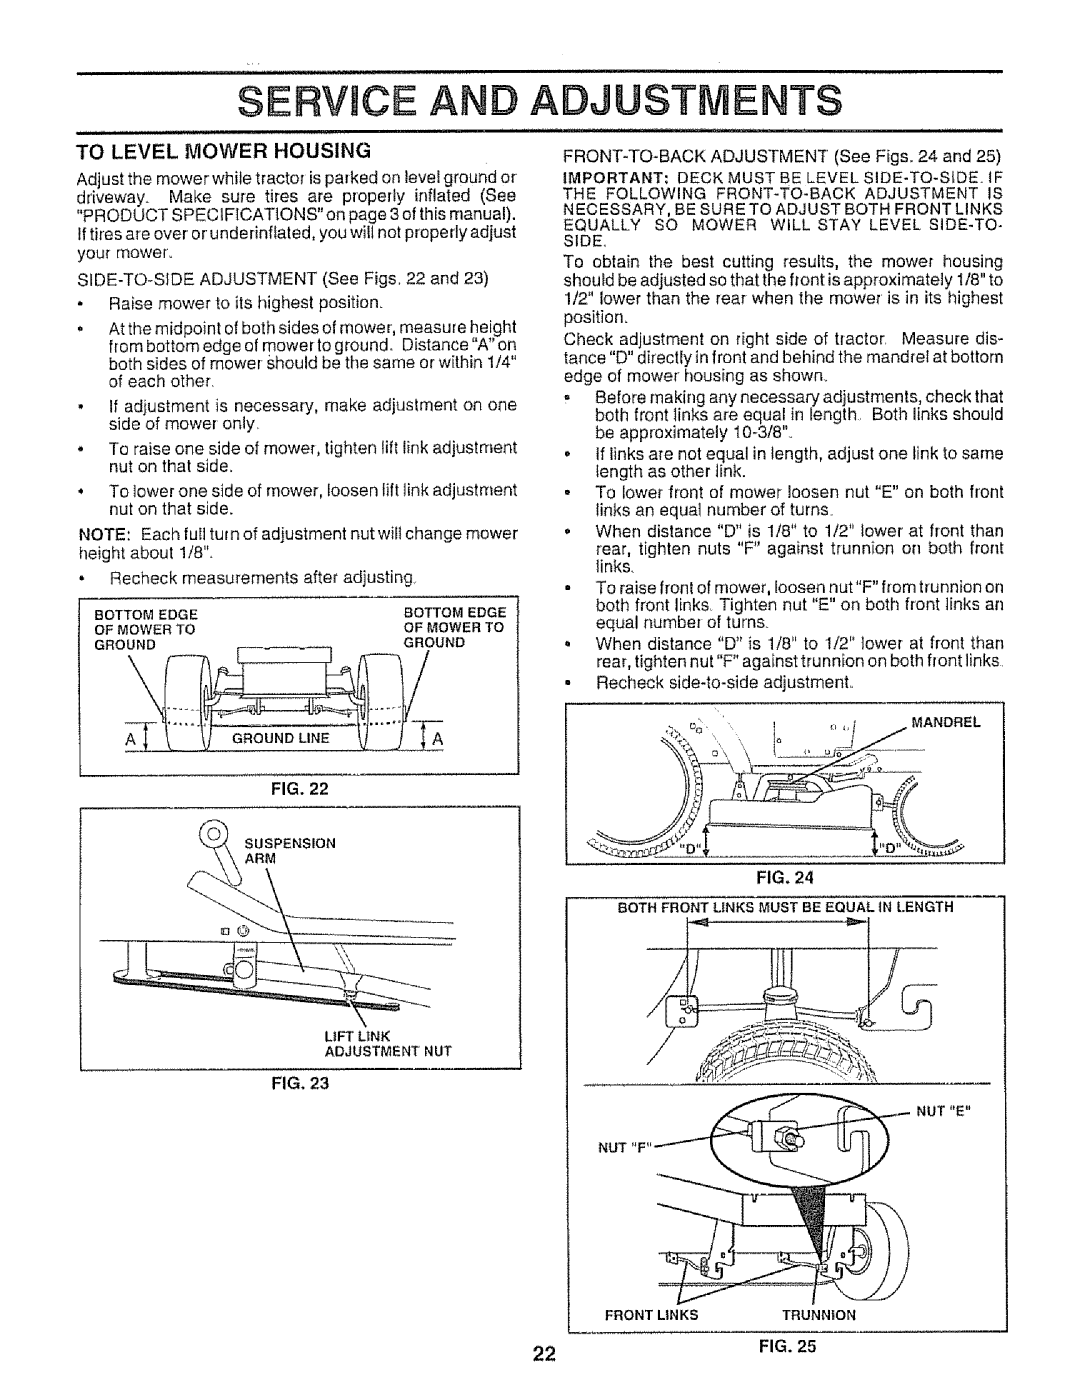 Sears 917.25953 owner manual SERVmCE AND ADJUSTMENTS, To Level Mower Housing 